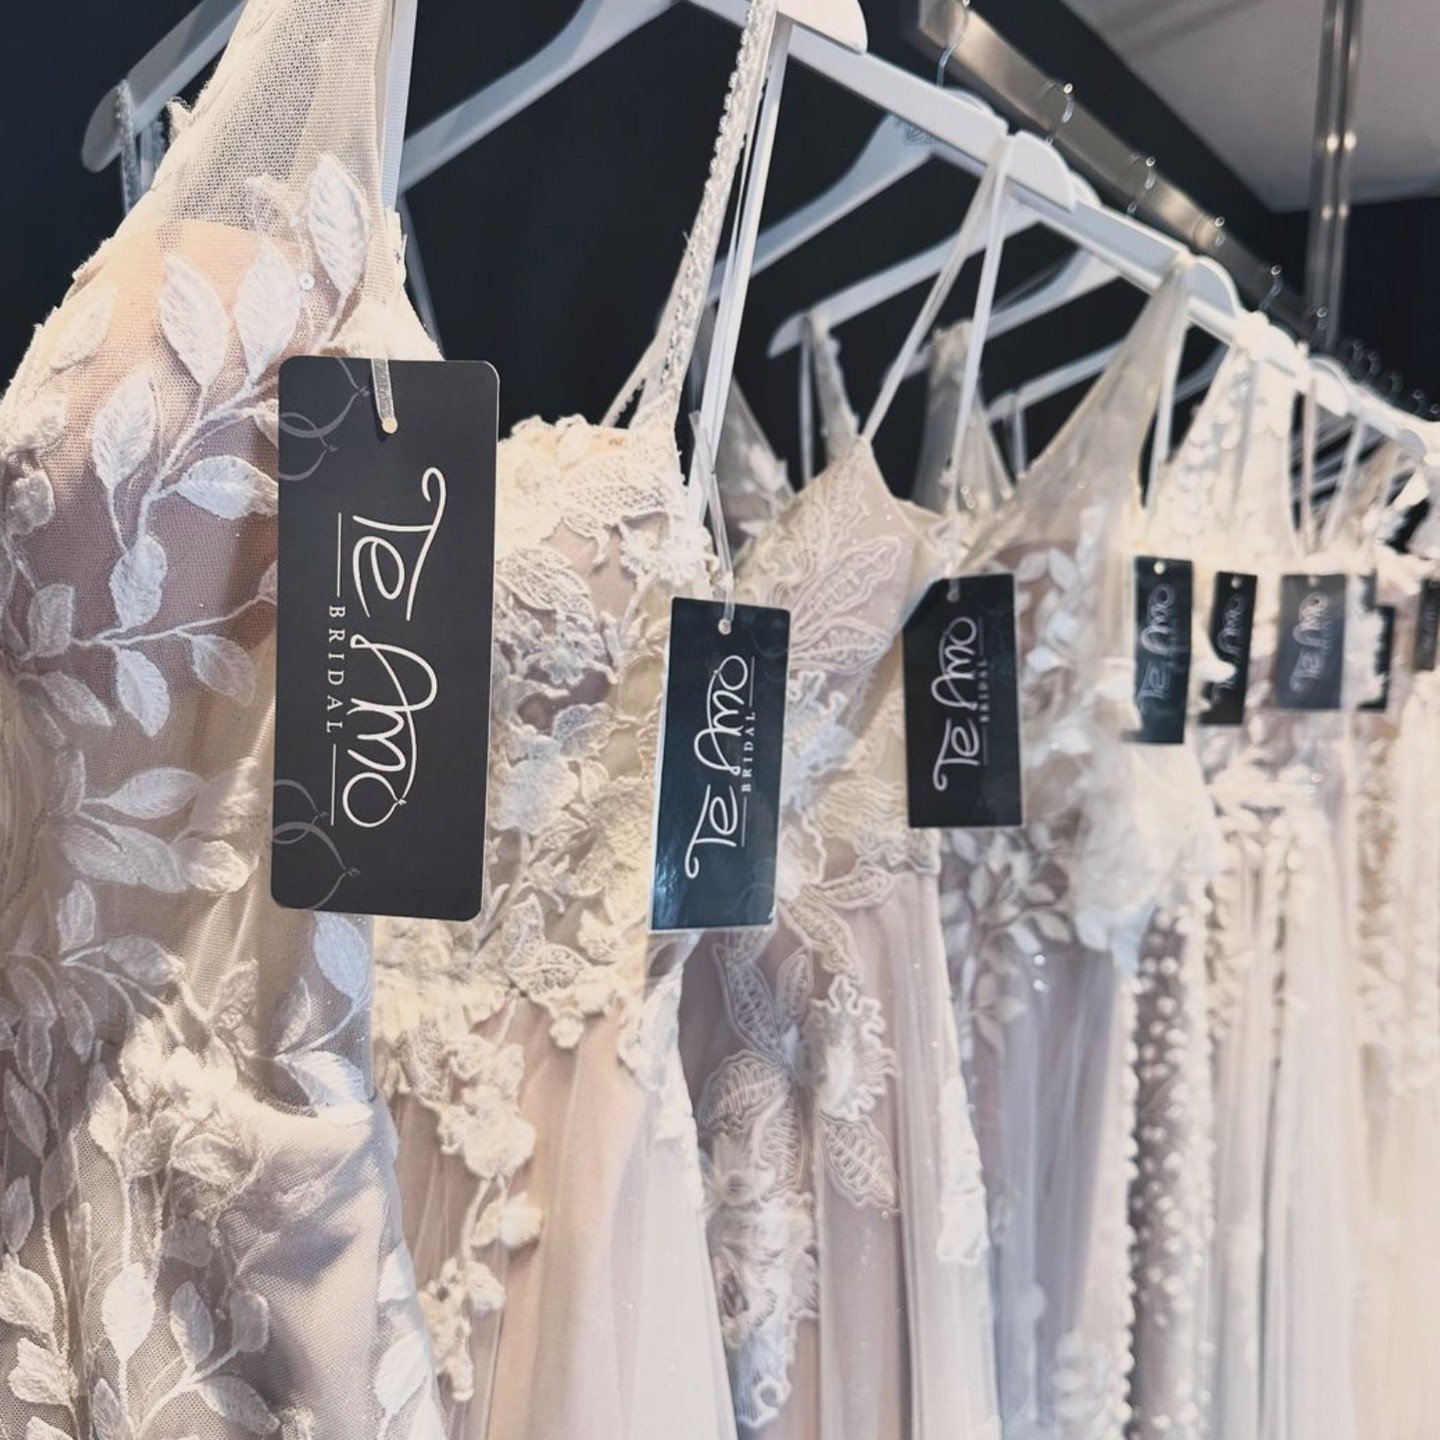 We love seeing our dress labels in situ! 😍

Dress tags are so important, not only for the finer details, but to keep your brand and boutique looking smart, stylish, current and professional 👌🏻

We can help with your tags, from design to print and 